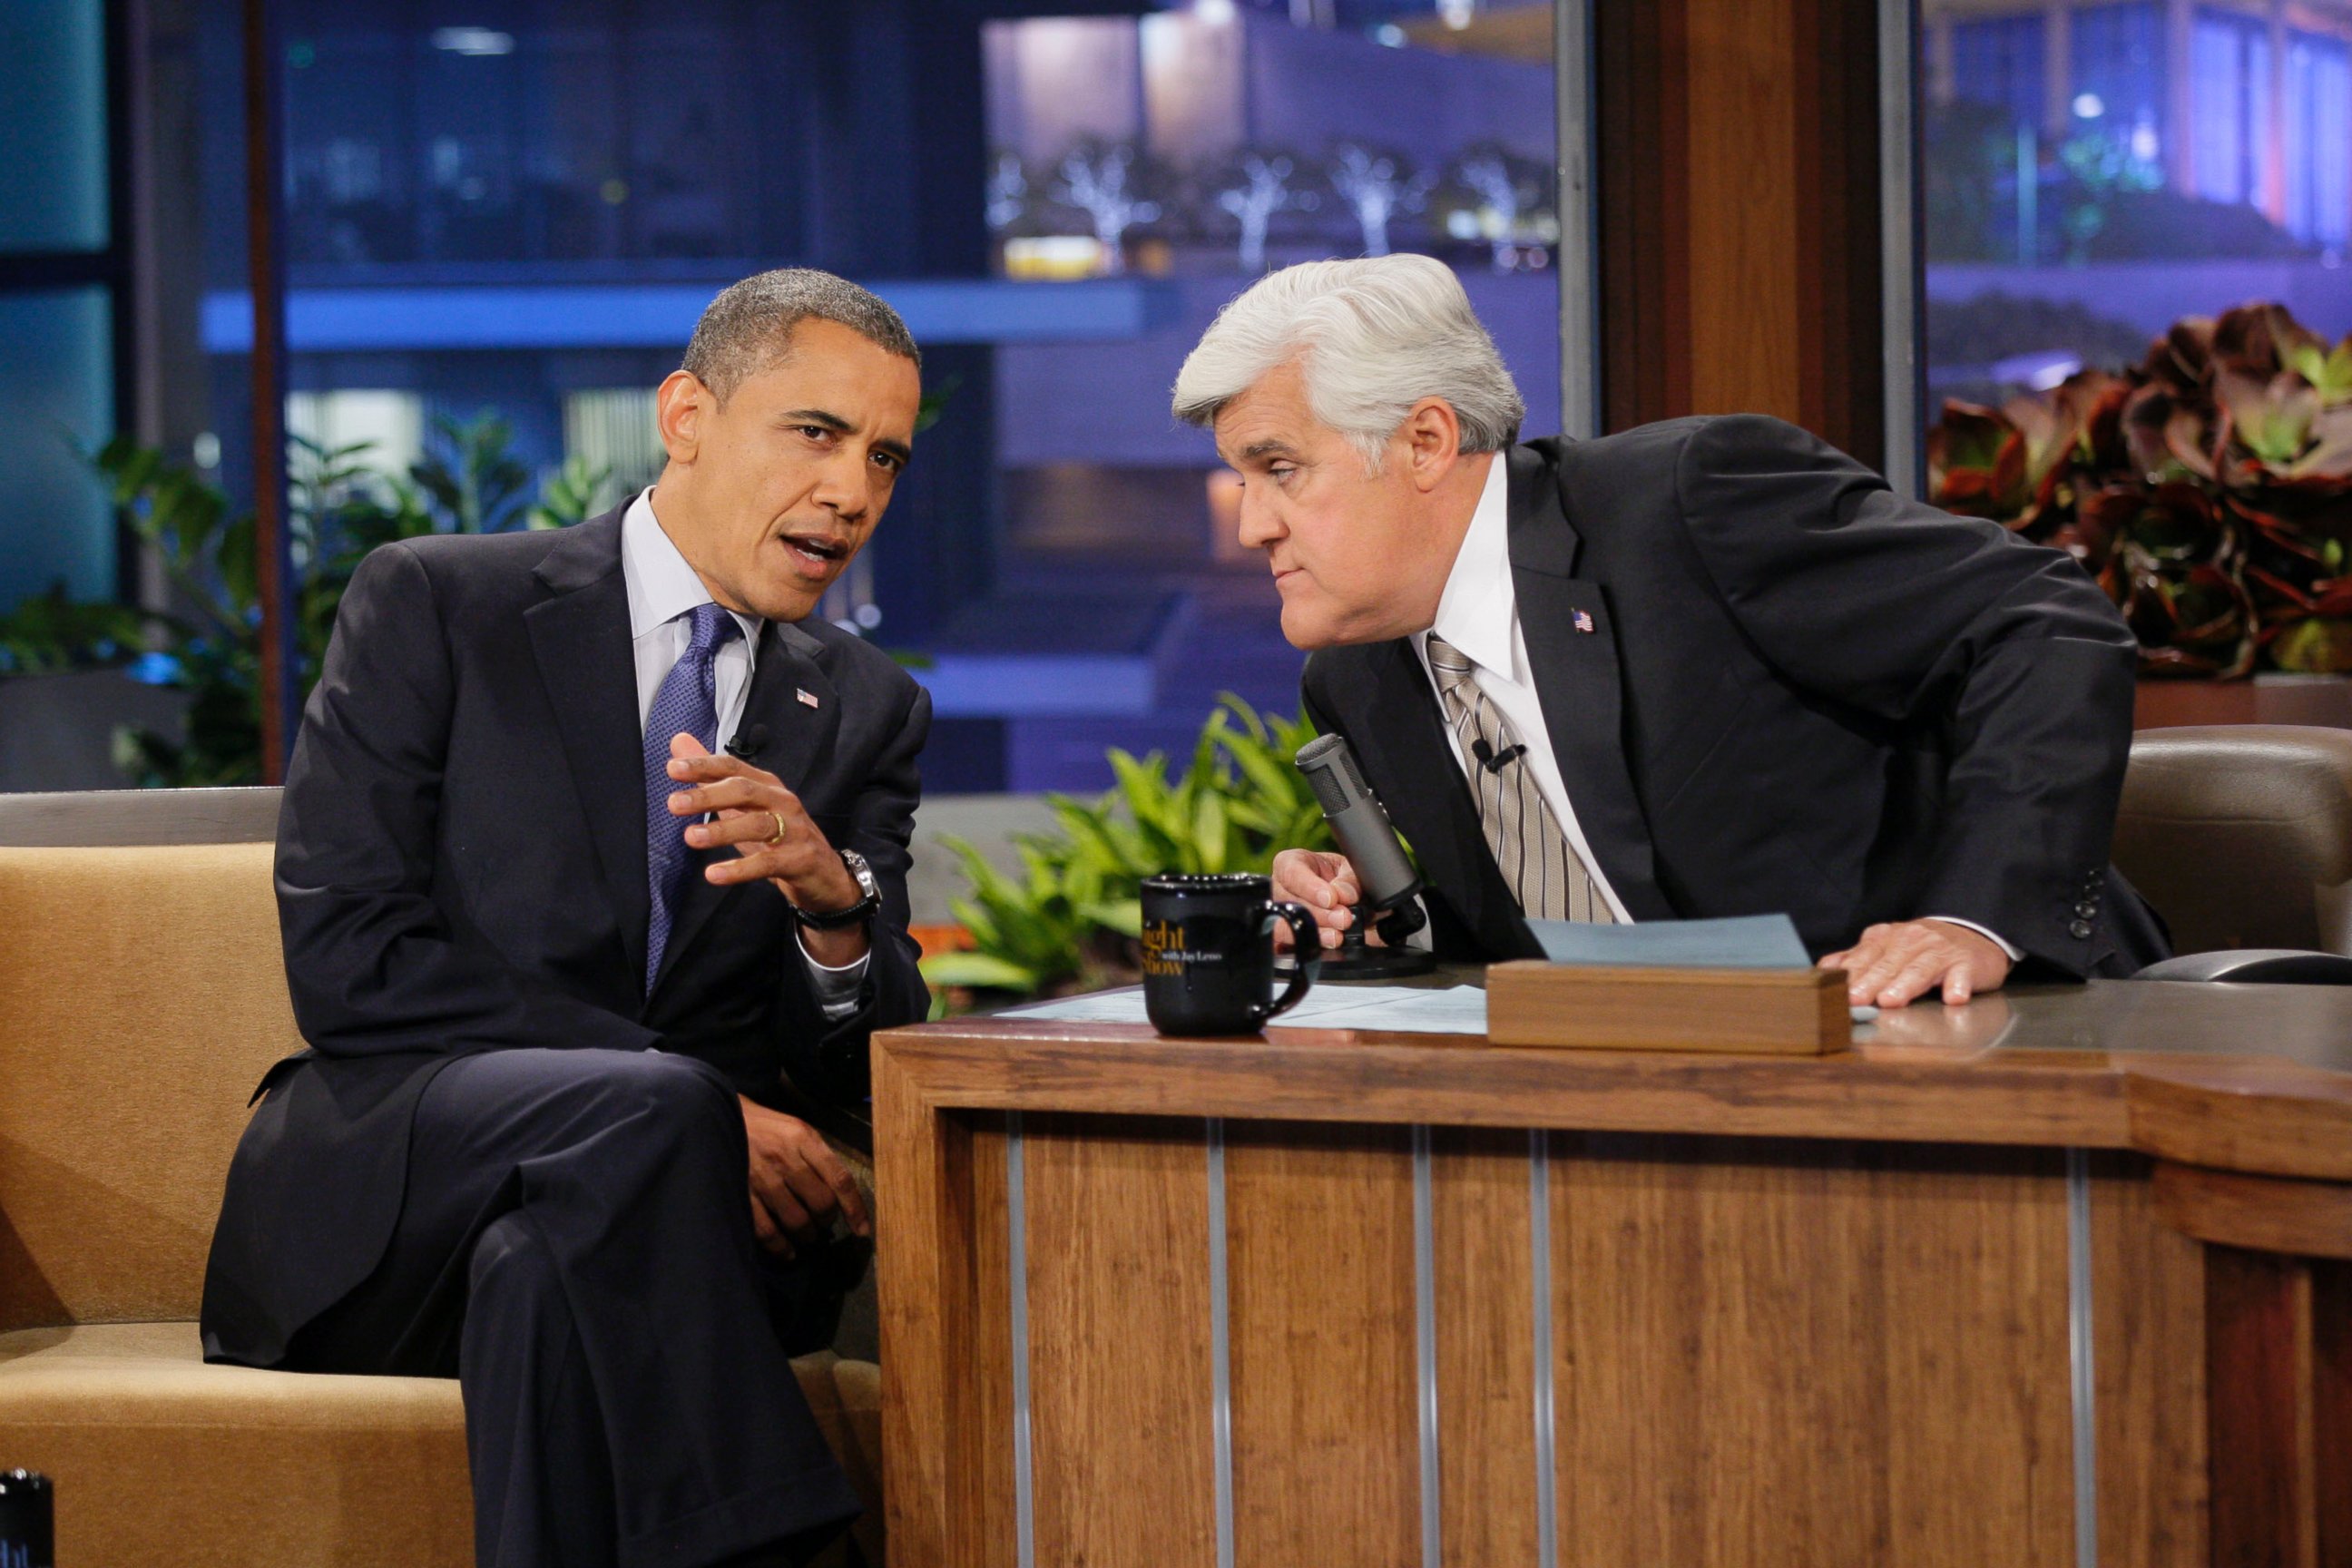 PHOTO: President Barack Obama appears on "The Tonight Show with Jay Leno" on October 24, 2012.